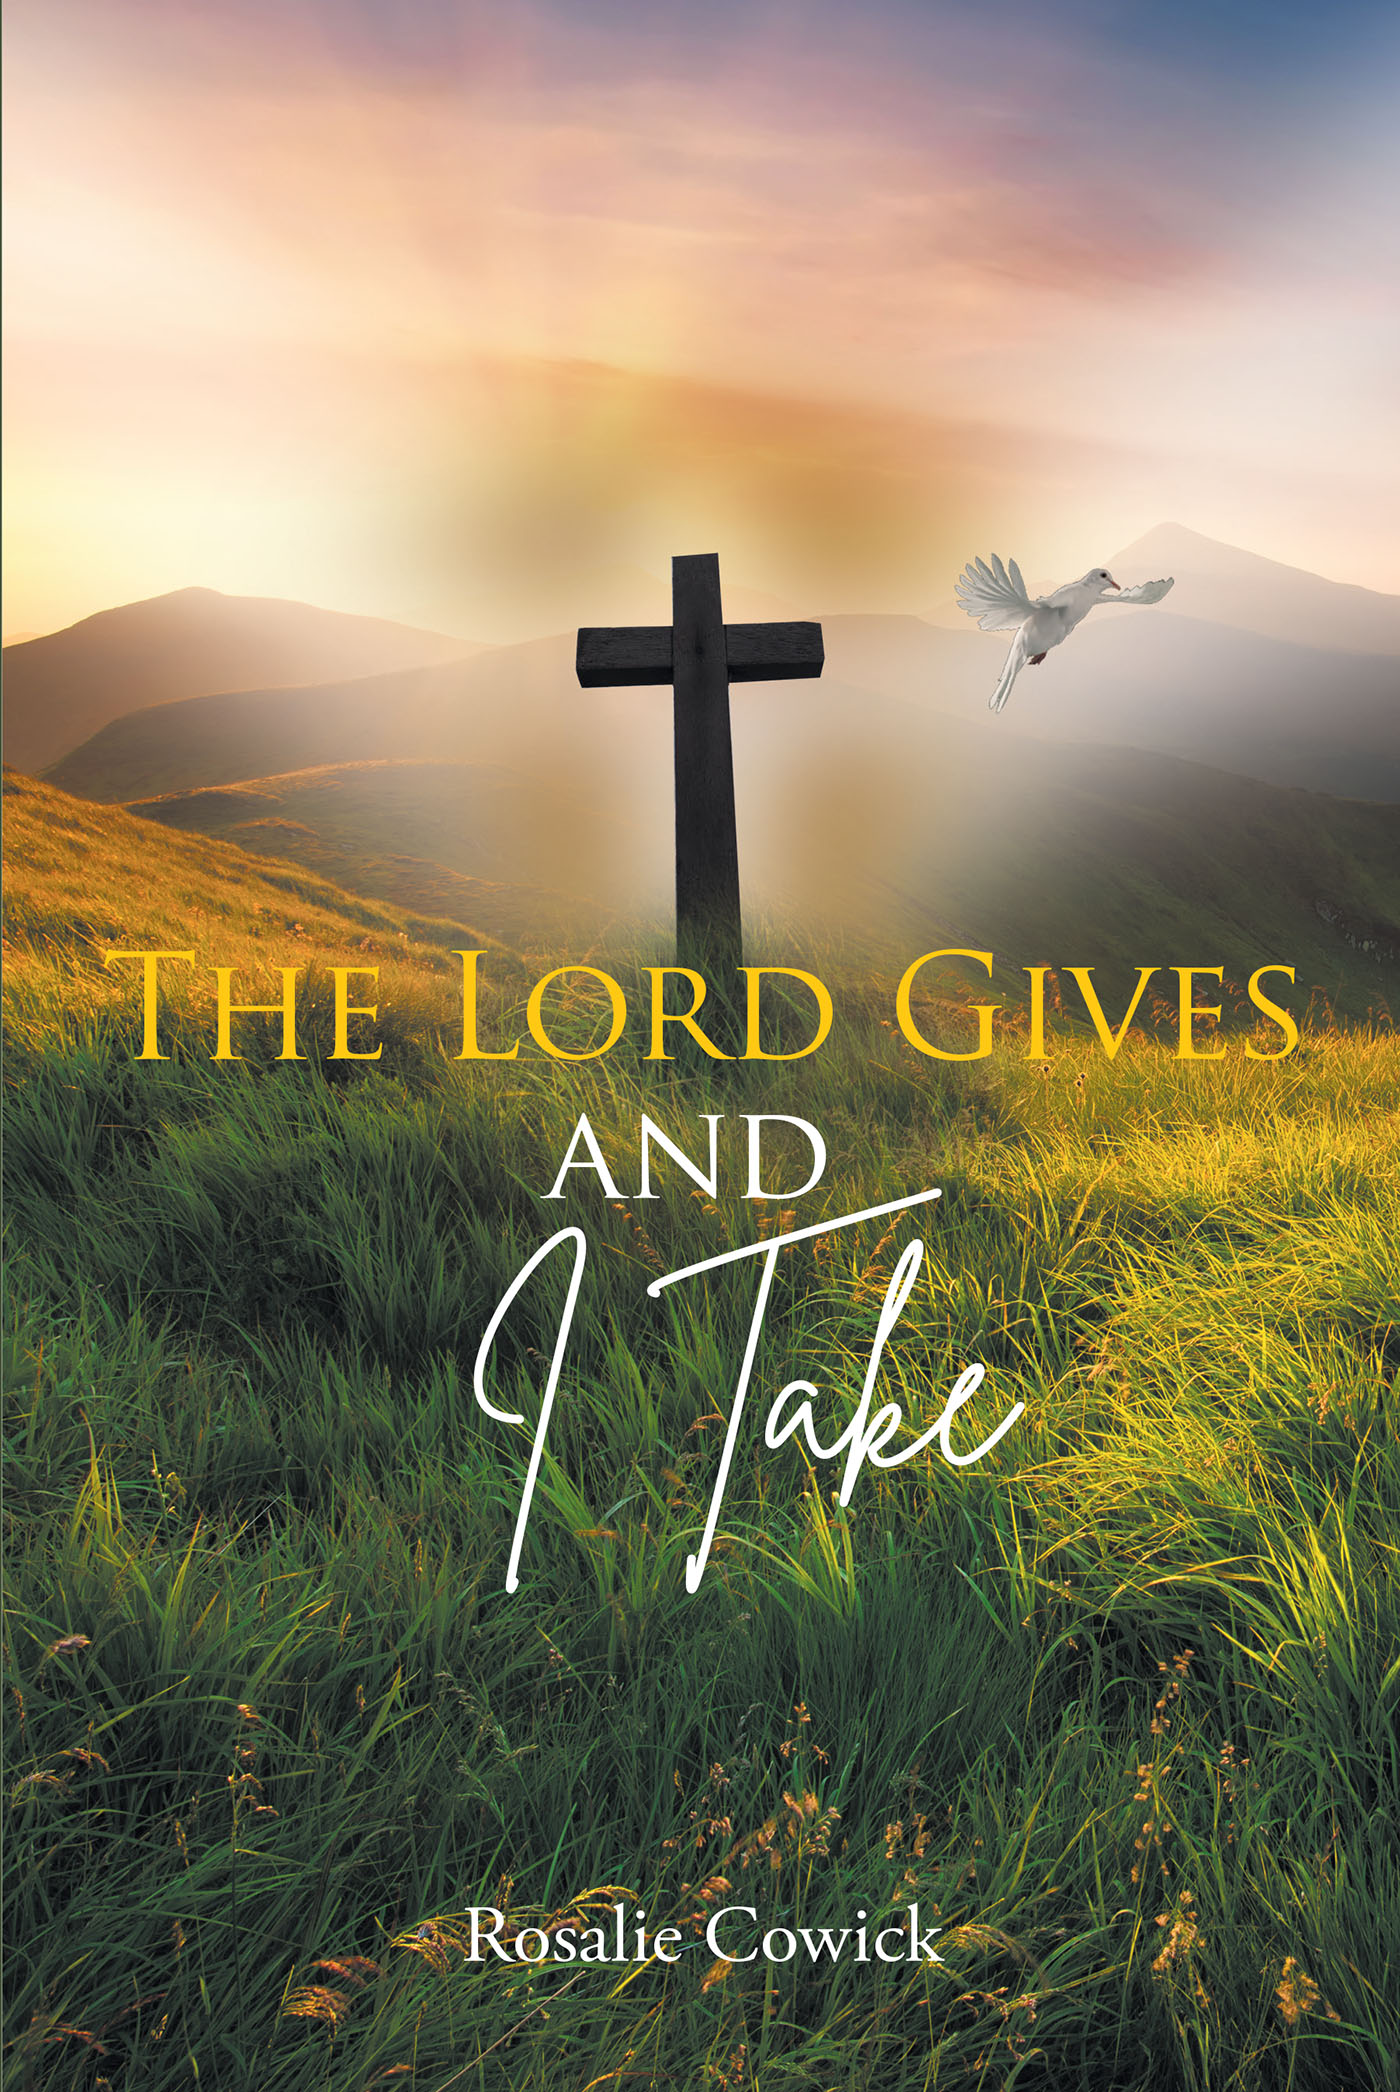 Rosalie Cowick’s Newly Released "The Lord Gives and I Take" is a Celebration of the Blessings God Provides in a Myriad of Ways